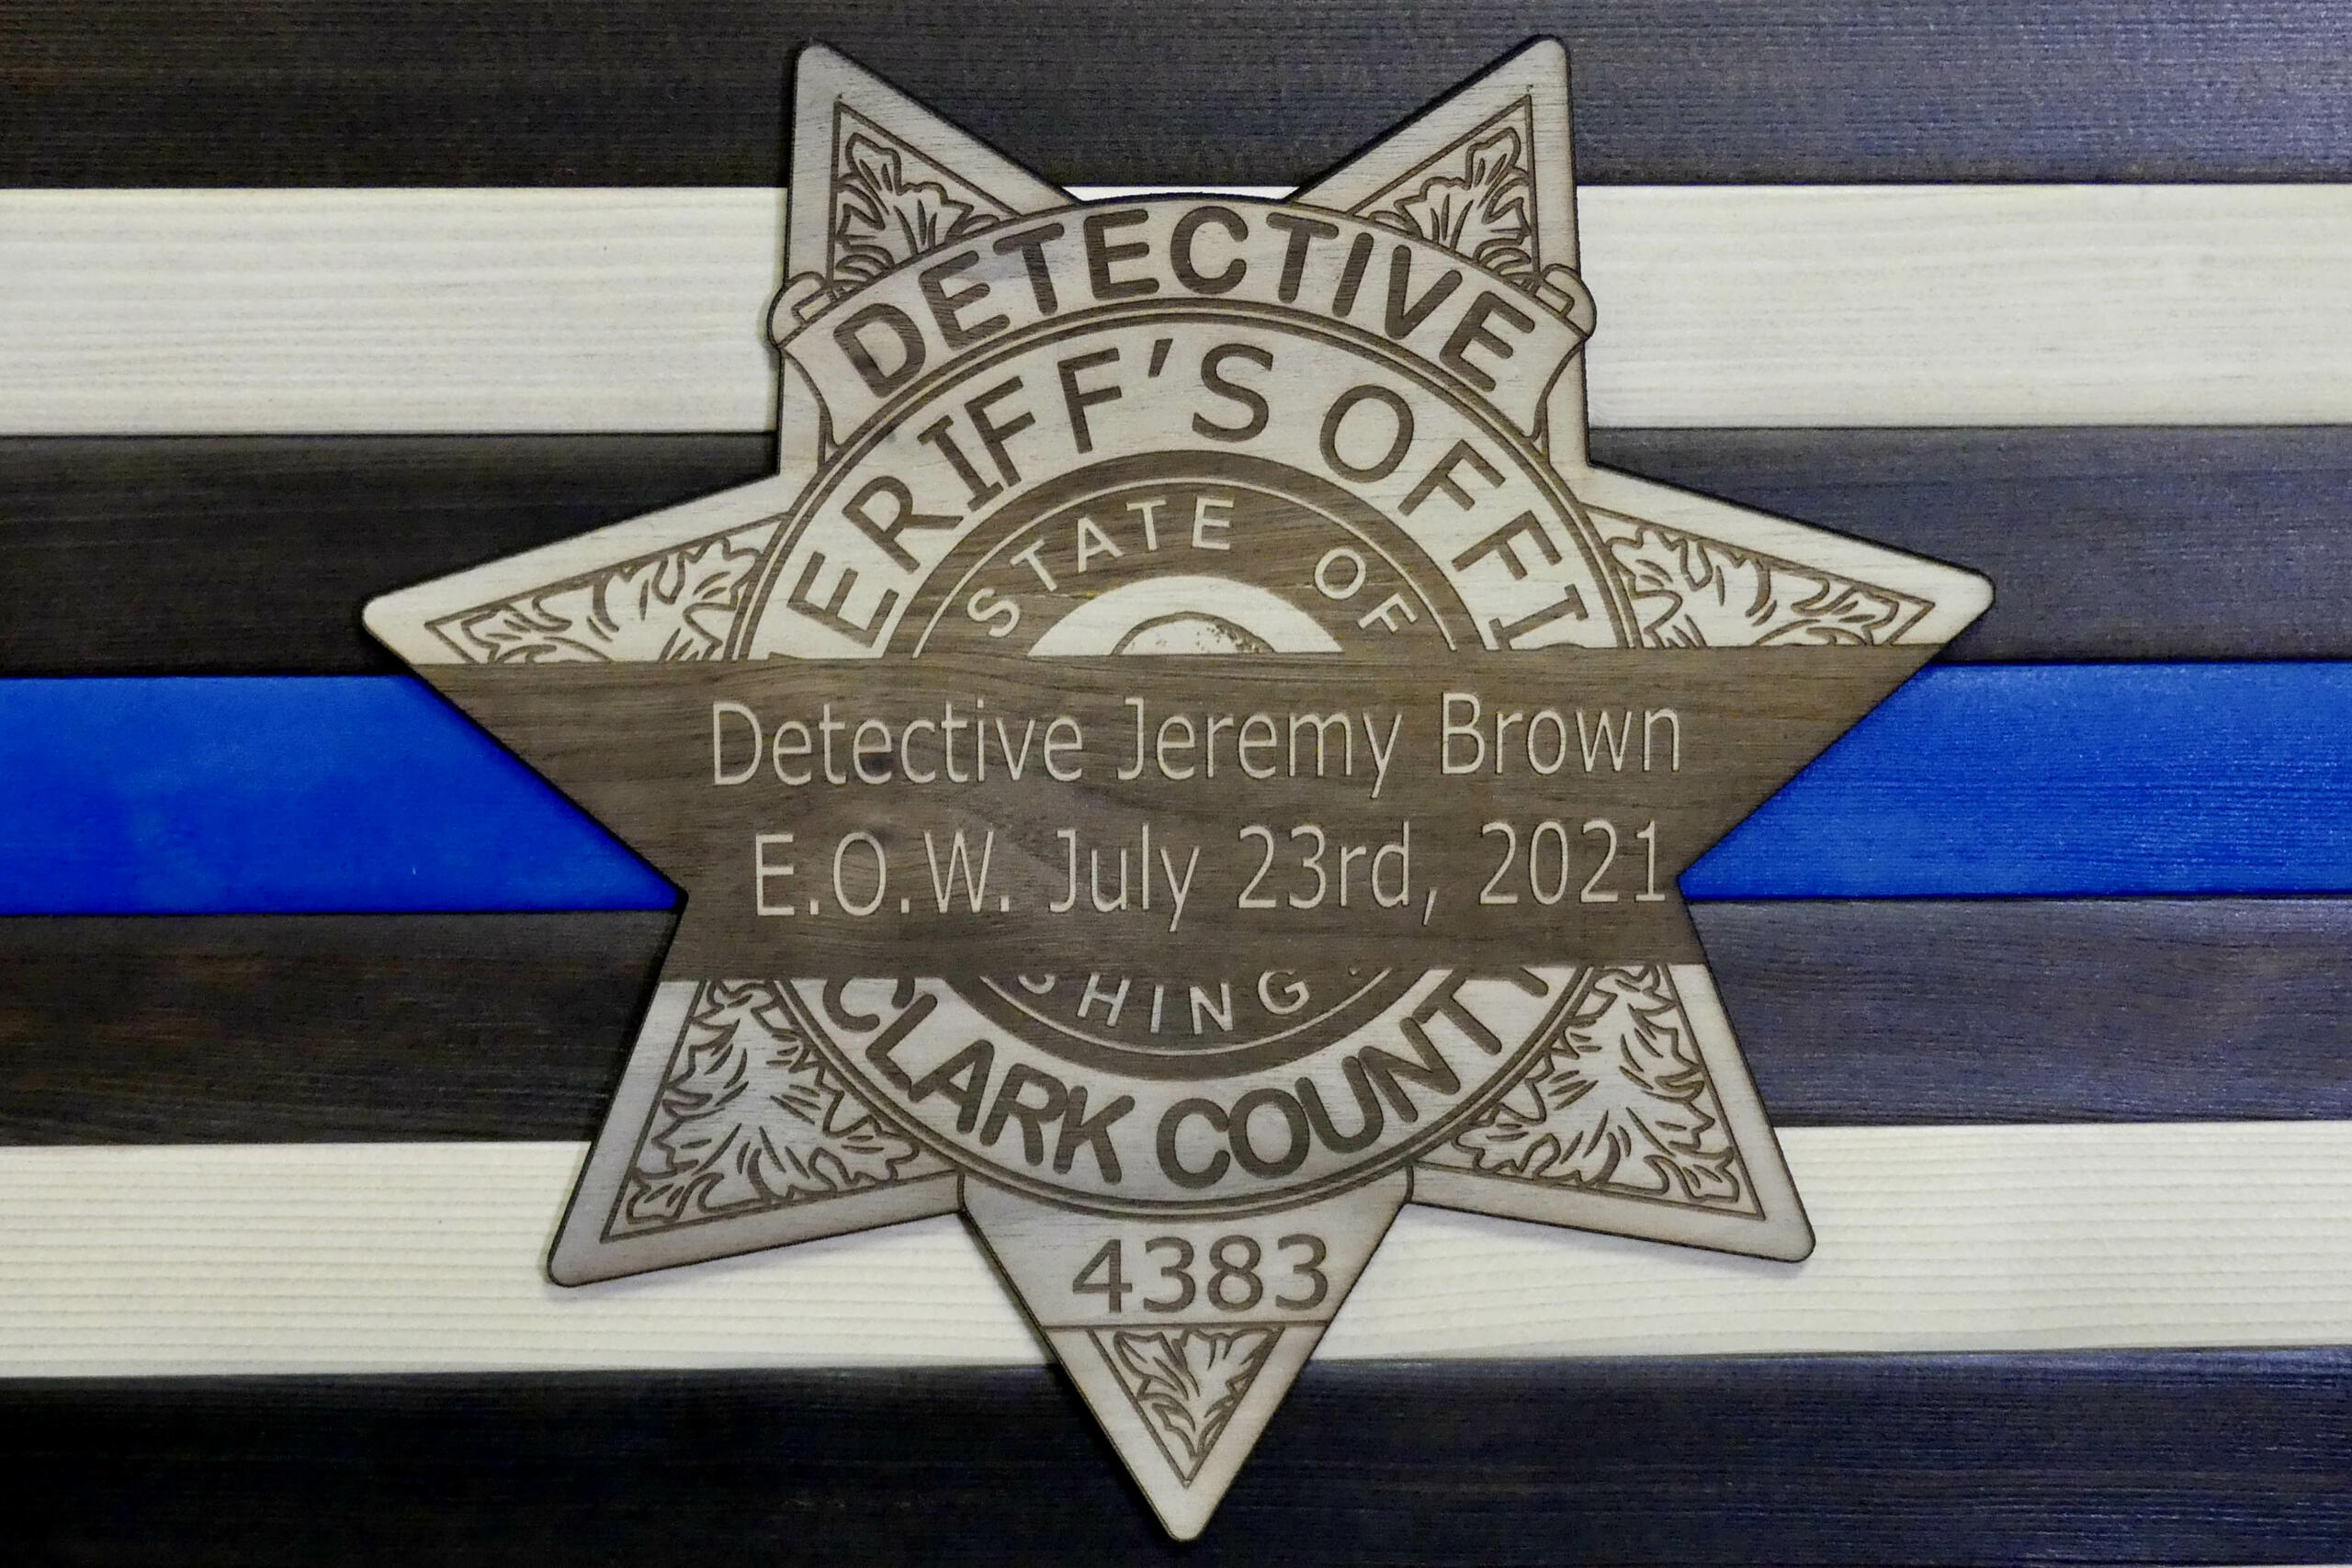 Aftermath of fatal shooting of Clark County detective